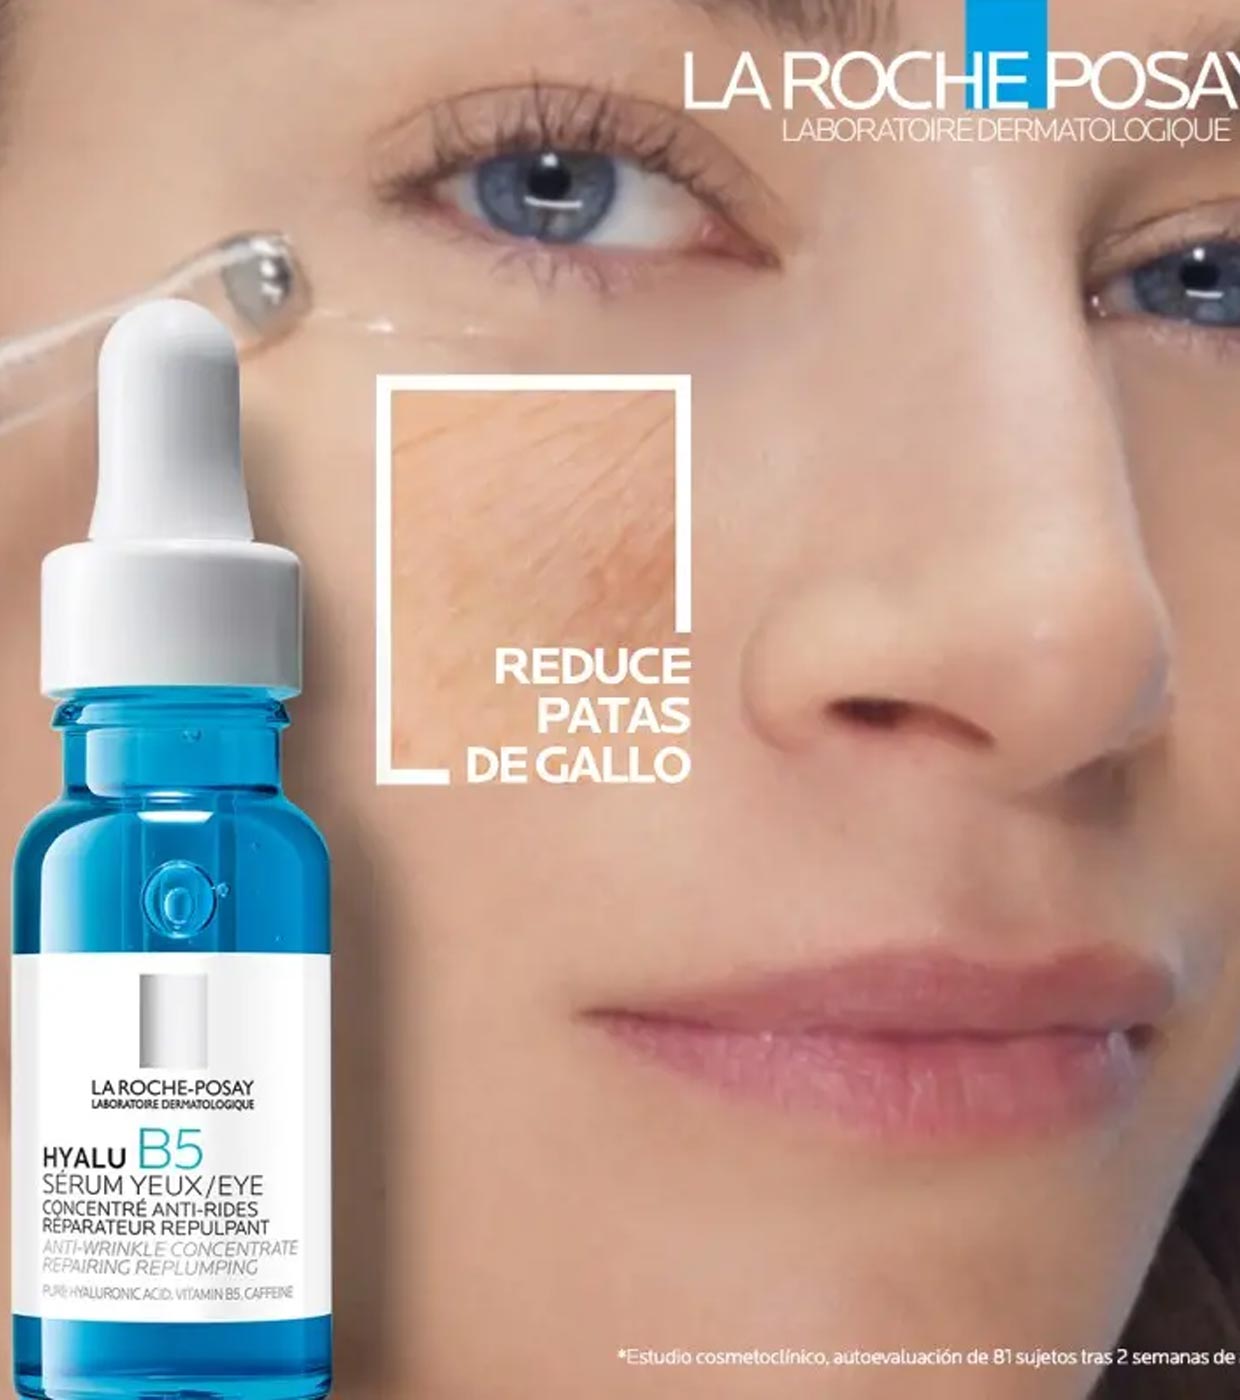 La Roche-Posay Hyalu B5 Pure Hyaluronic Acid Serum for Face | Vitamin B5 +  Hyaluronic Acid + Madecassoside | Hydrating Serum Visibly Plumps Skin 